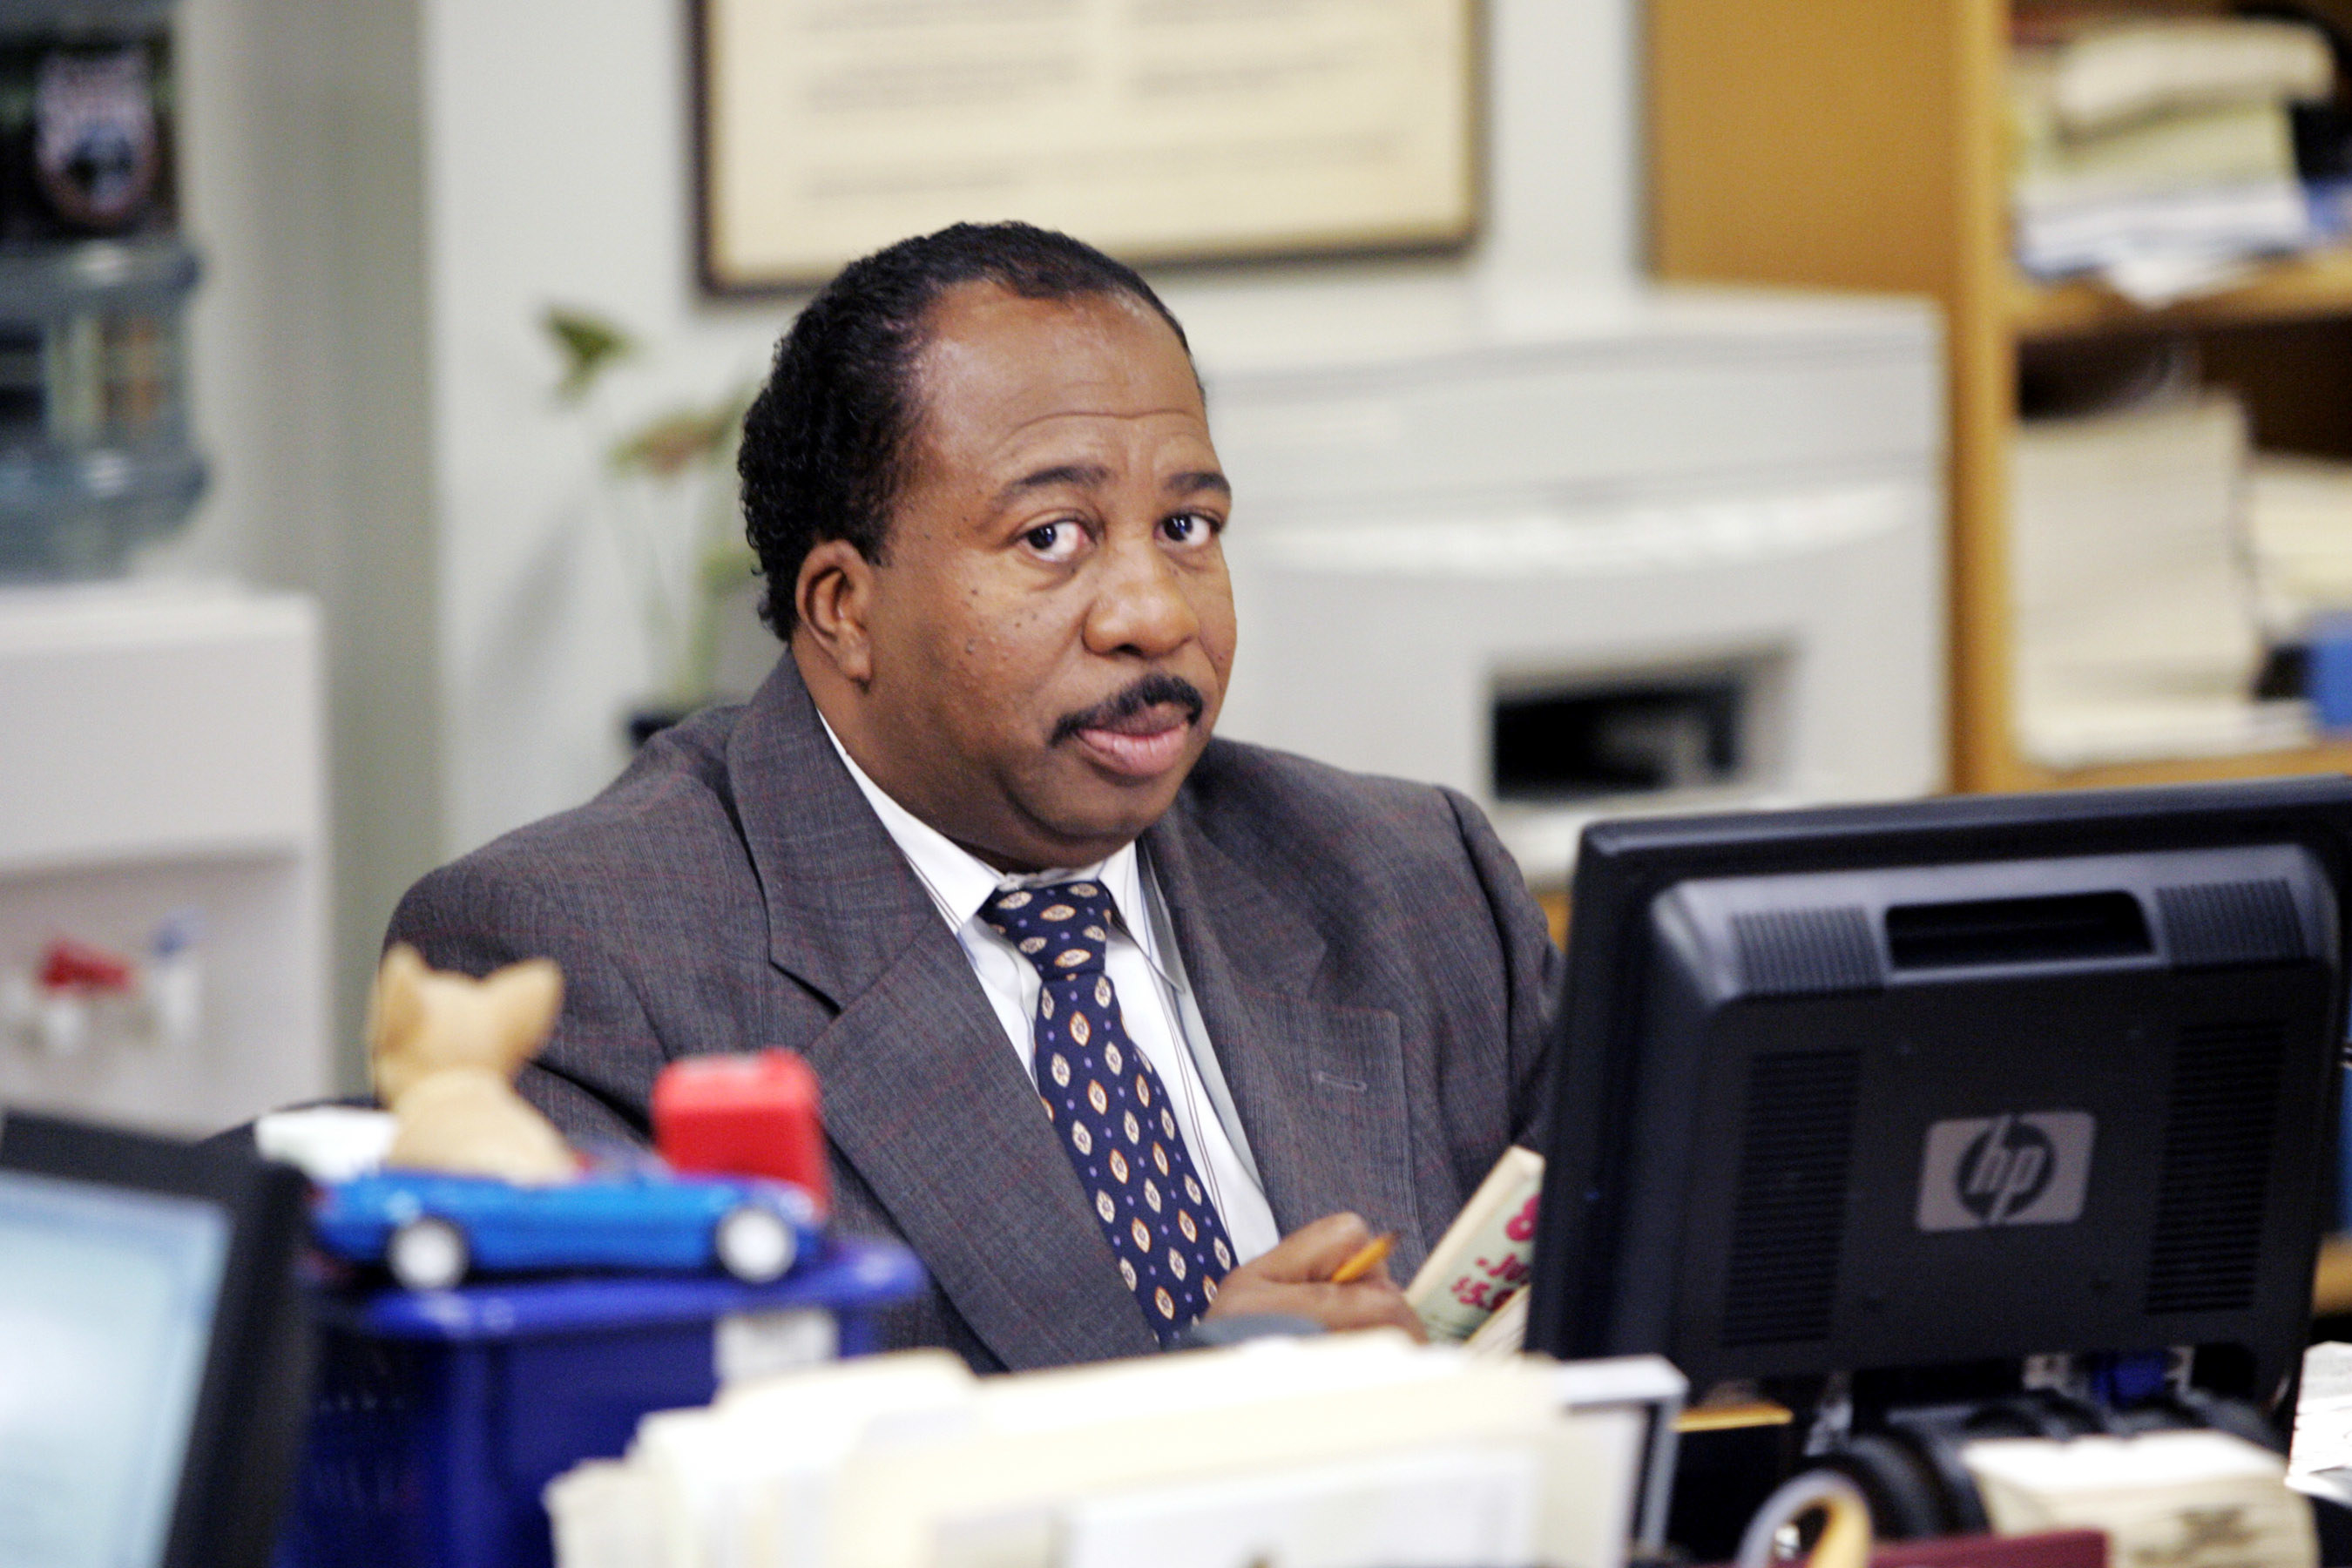 Stanley from The Office